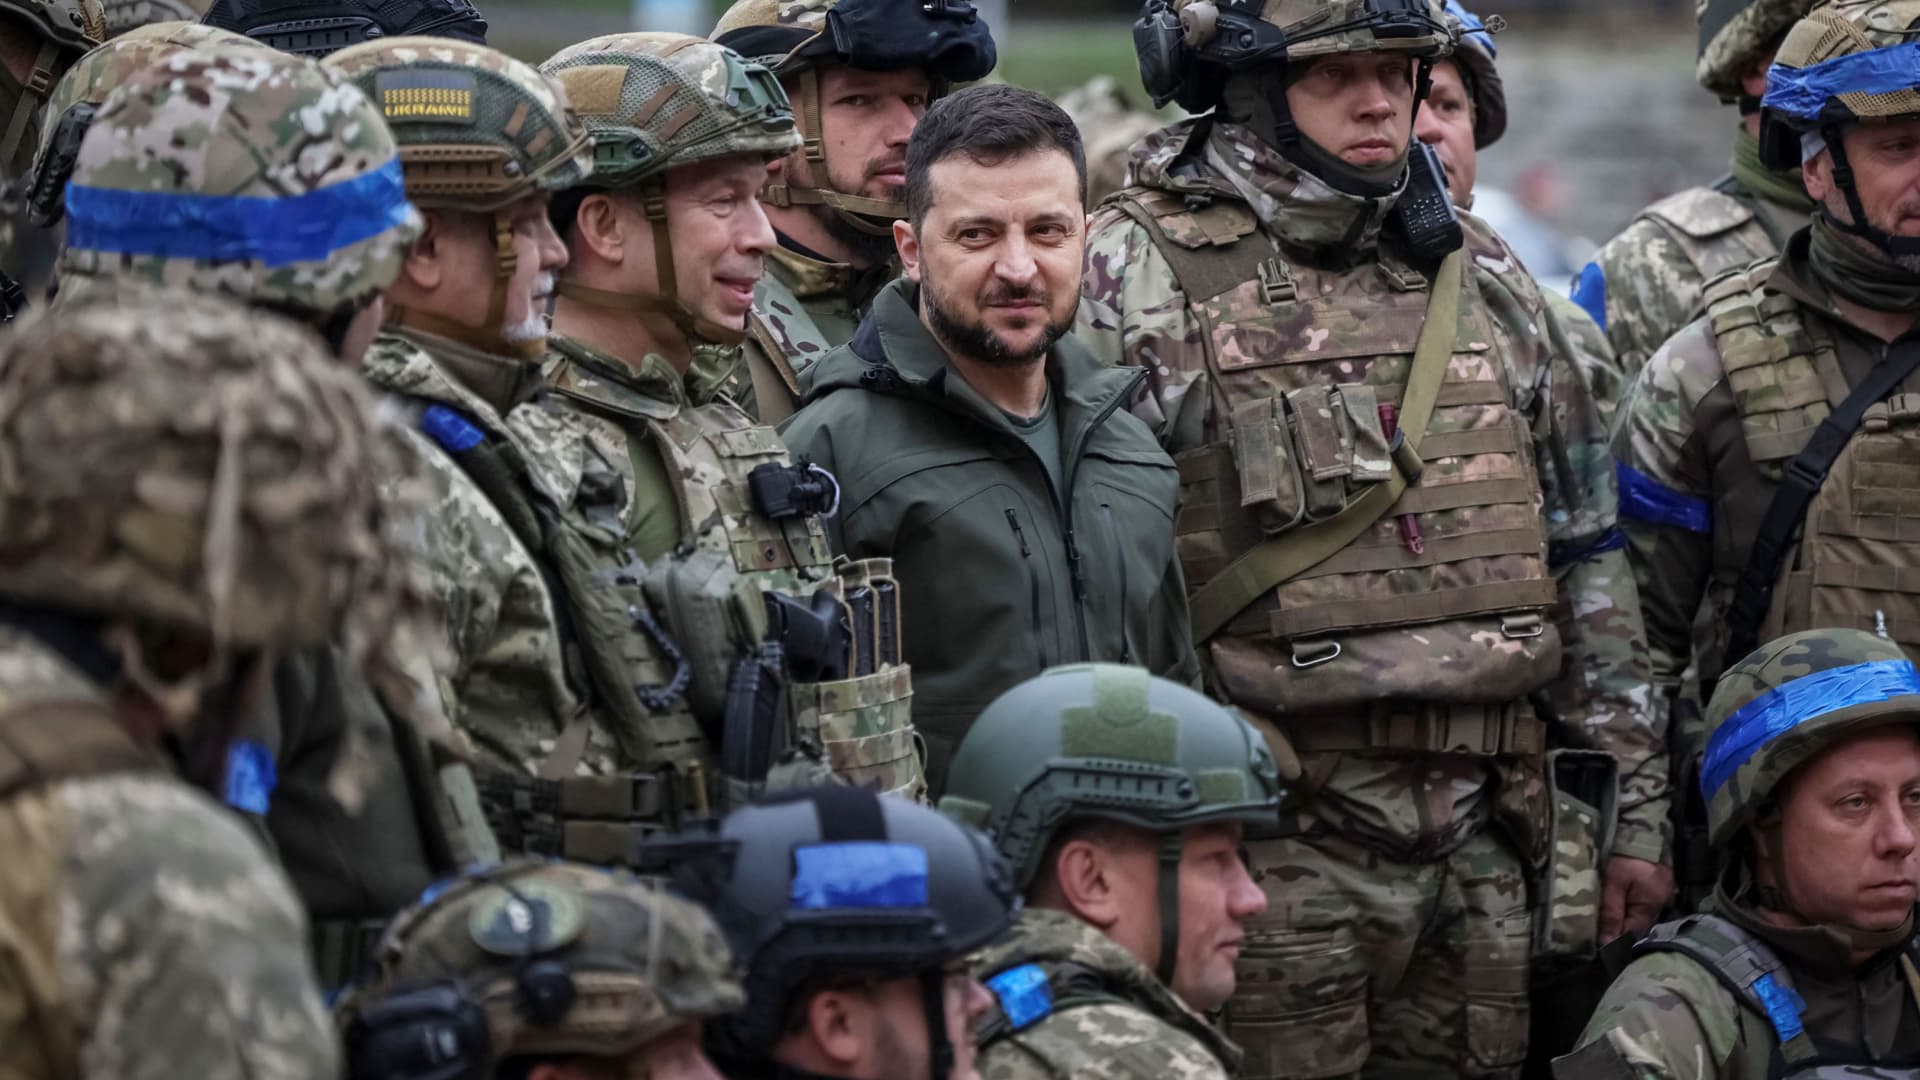 Ukraine's President Volodymyr Zelenskyy poses for a pictures with Ukrainian servicemen as he visits the town of Izium, recently liberated by Ukrainian Armed Forces, in Kharkiv region, Ukraine September 14, 2022.